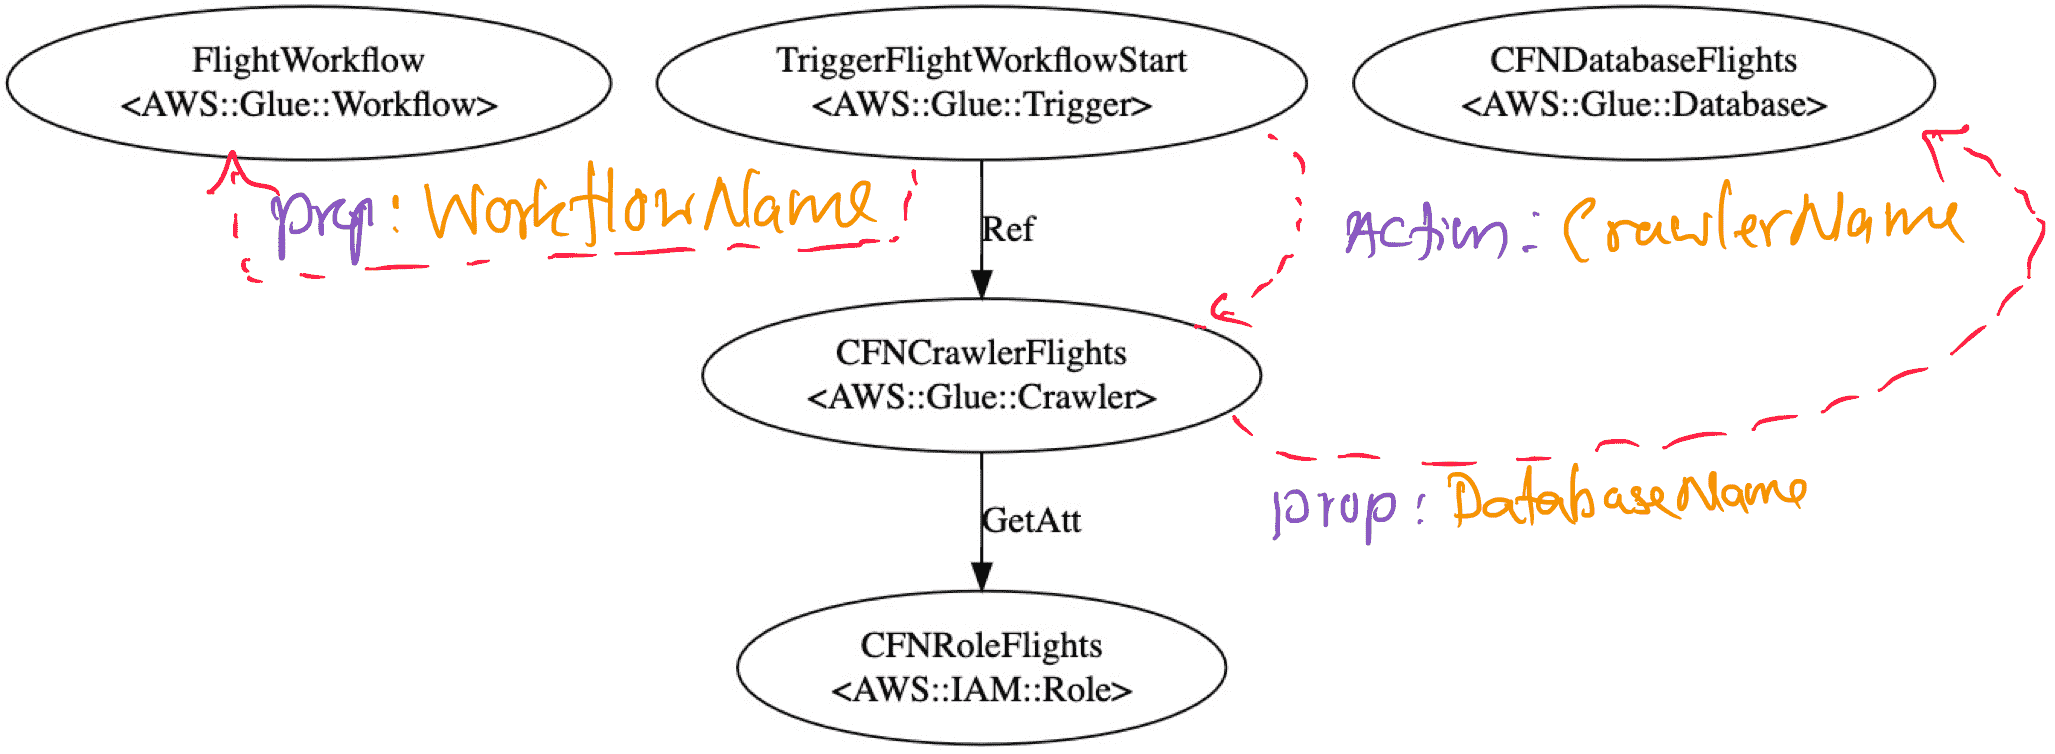 CFN stack with the workflow